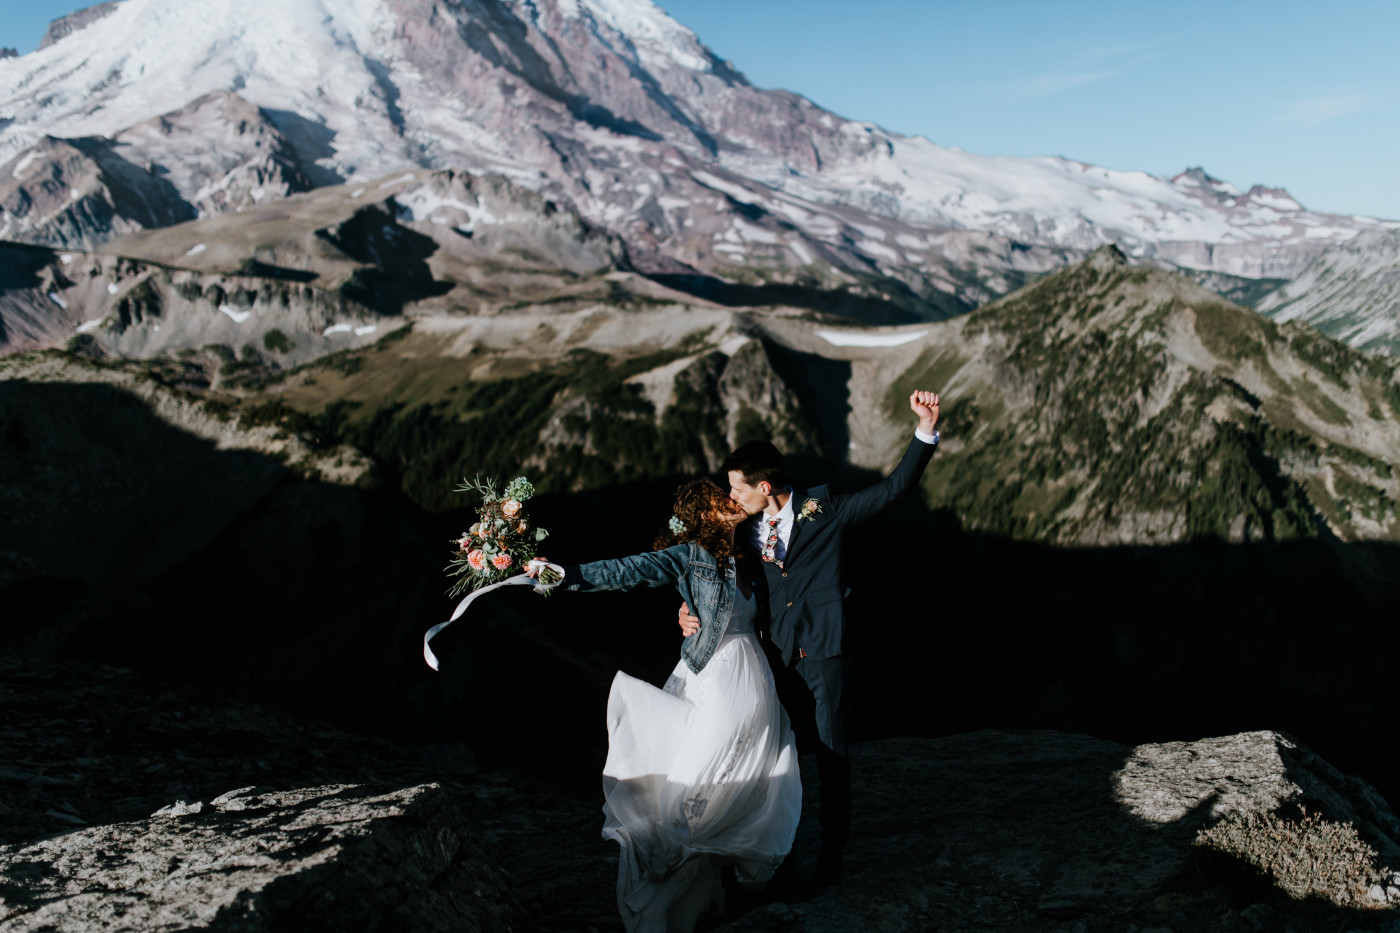 Tasha and Chad kiss while celebrating. Elopement photography at Mount Rainier by Sienna Plus Josh.